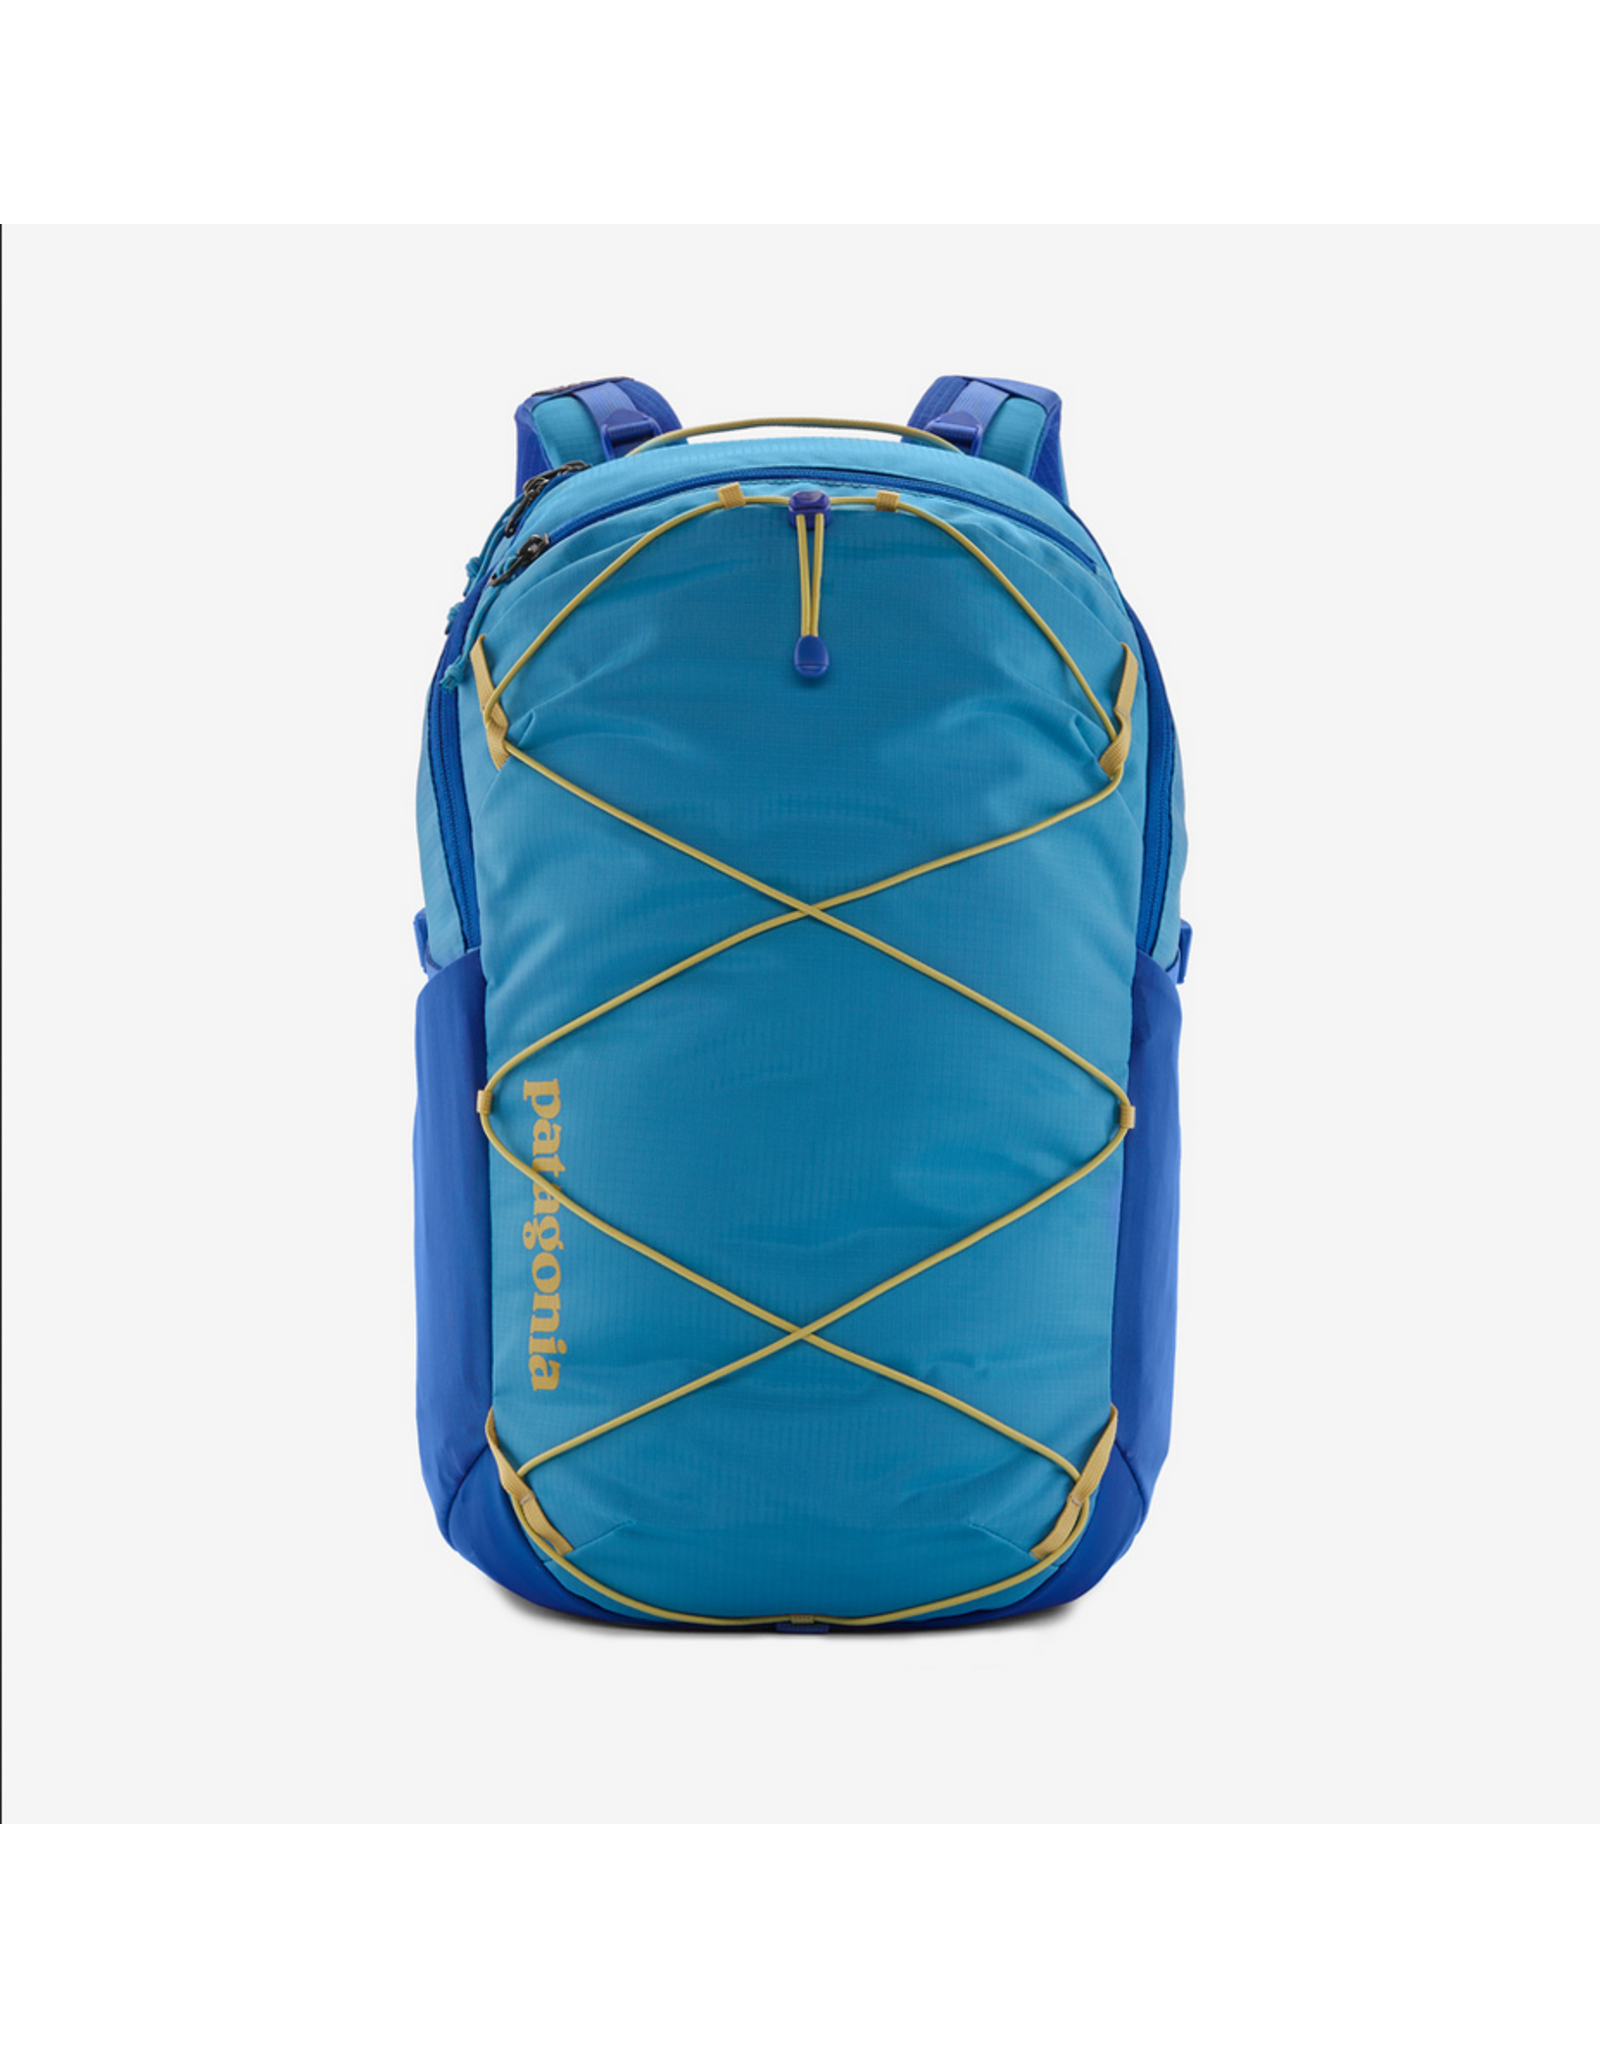 PATAGONIA REFUGIO DAY PACK 30L